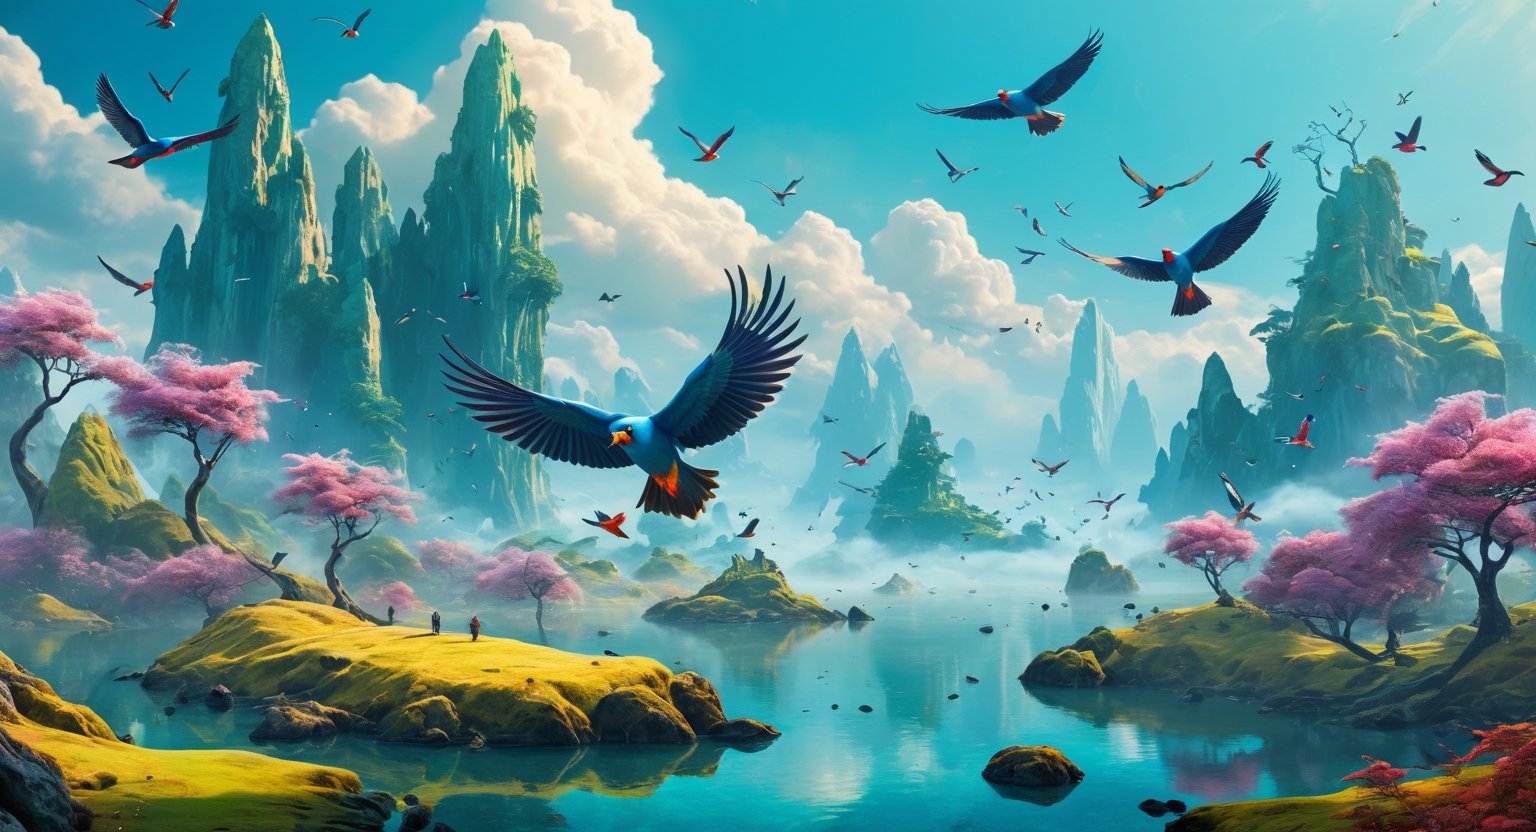 (best quality), (high resolutuion), (man), Craft a modern fantasy scene 3D dimension, featuring some colored birds within a captivating landscape background,Digital painting 